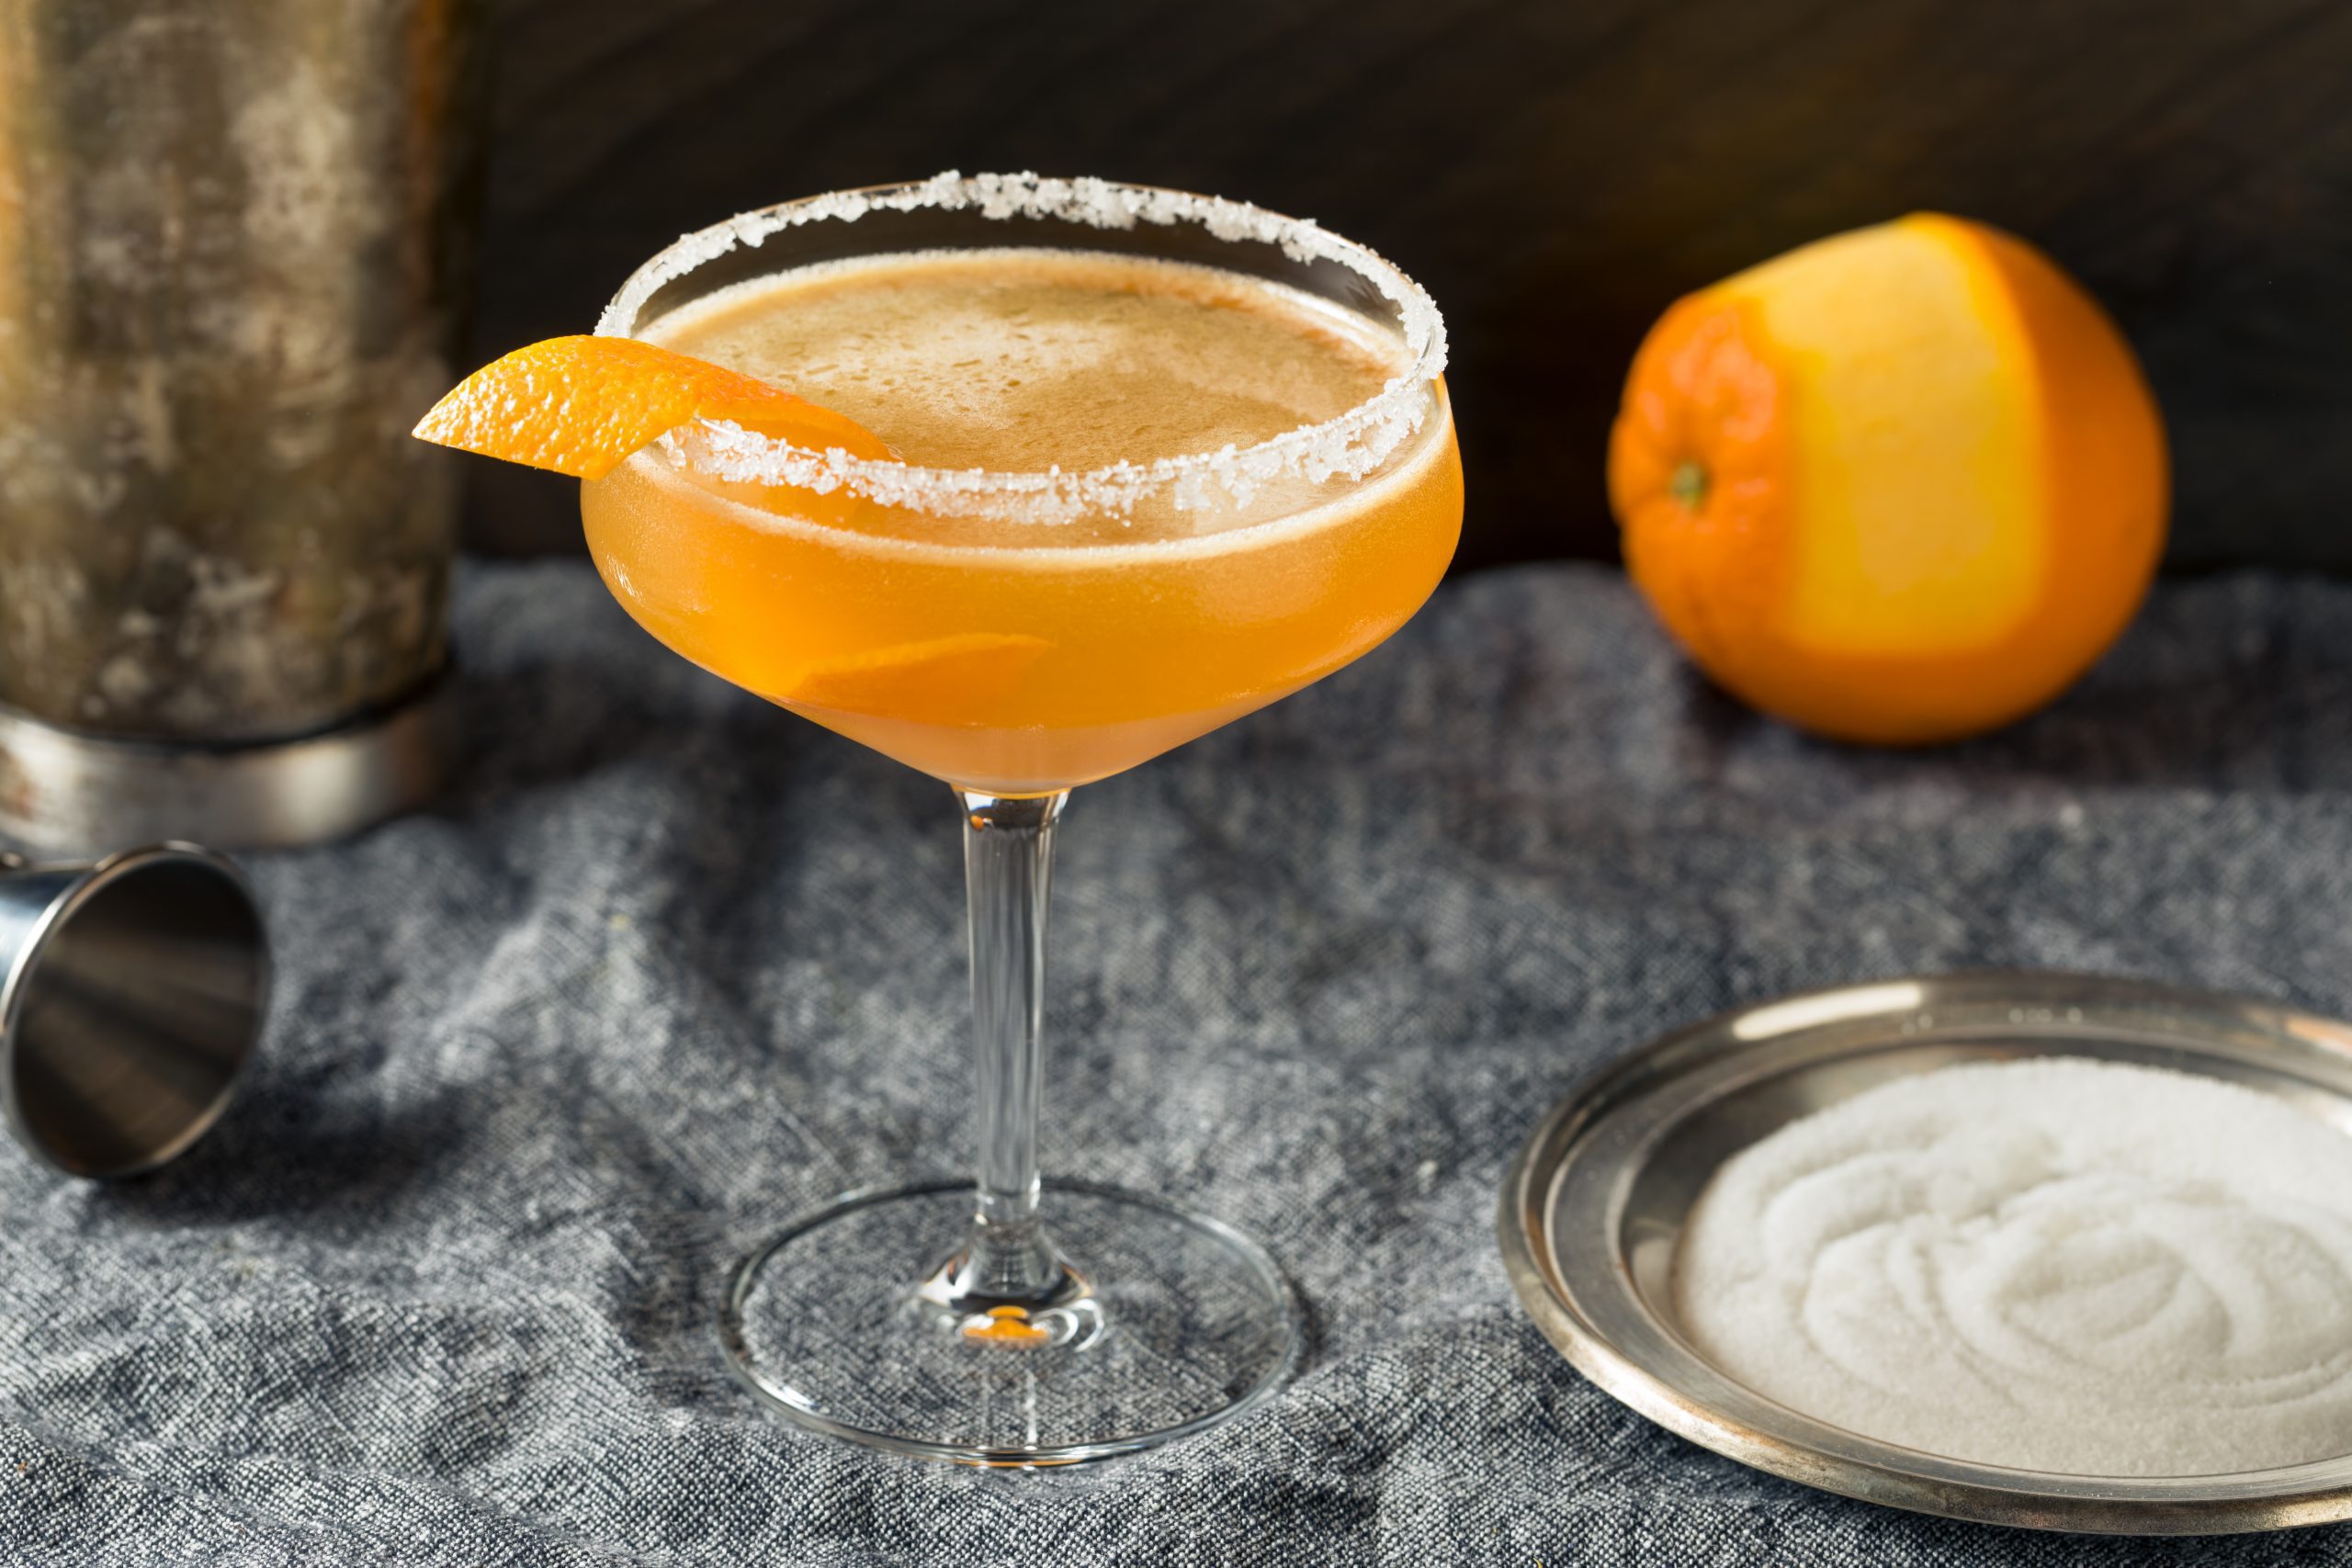 get sidecar recipe and read cocktail history